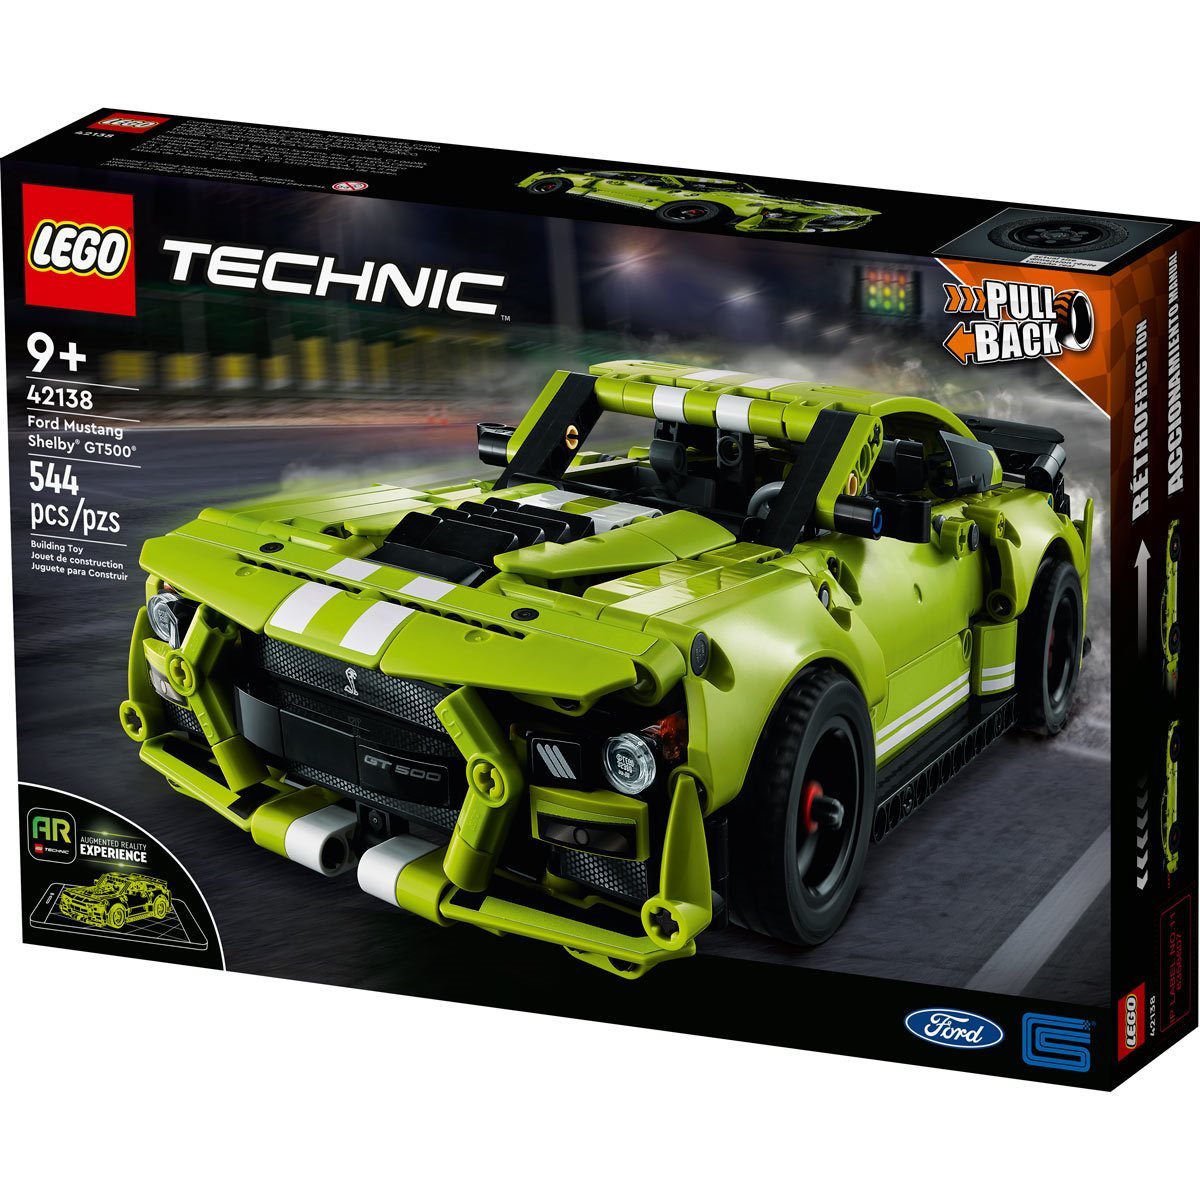 Ford Mustang Shelby® GT500® 42138, Technic